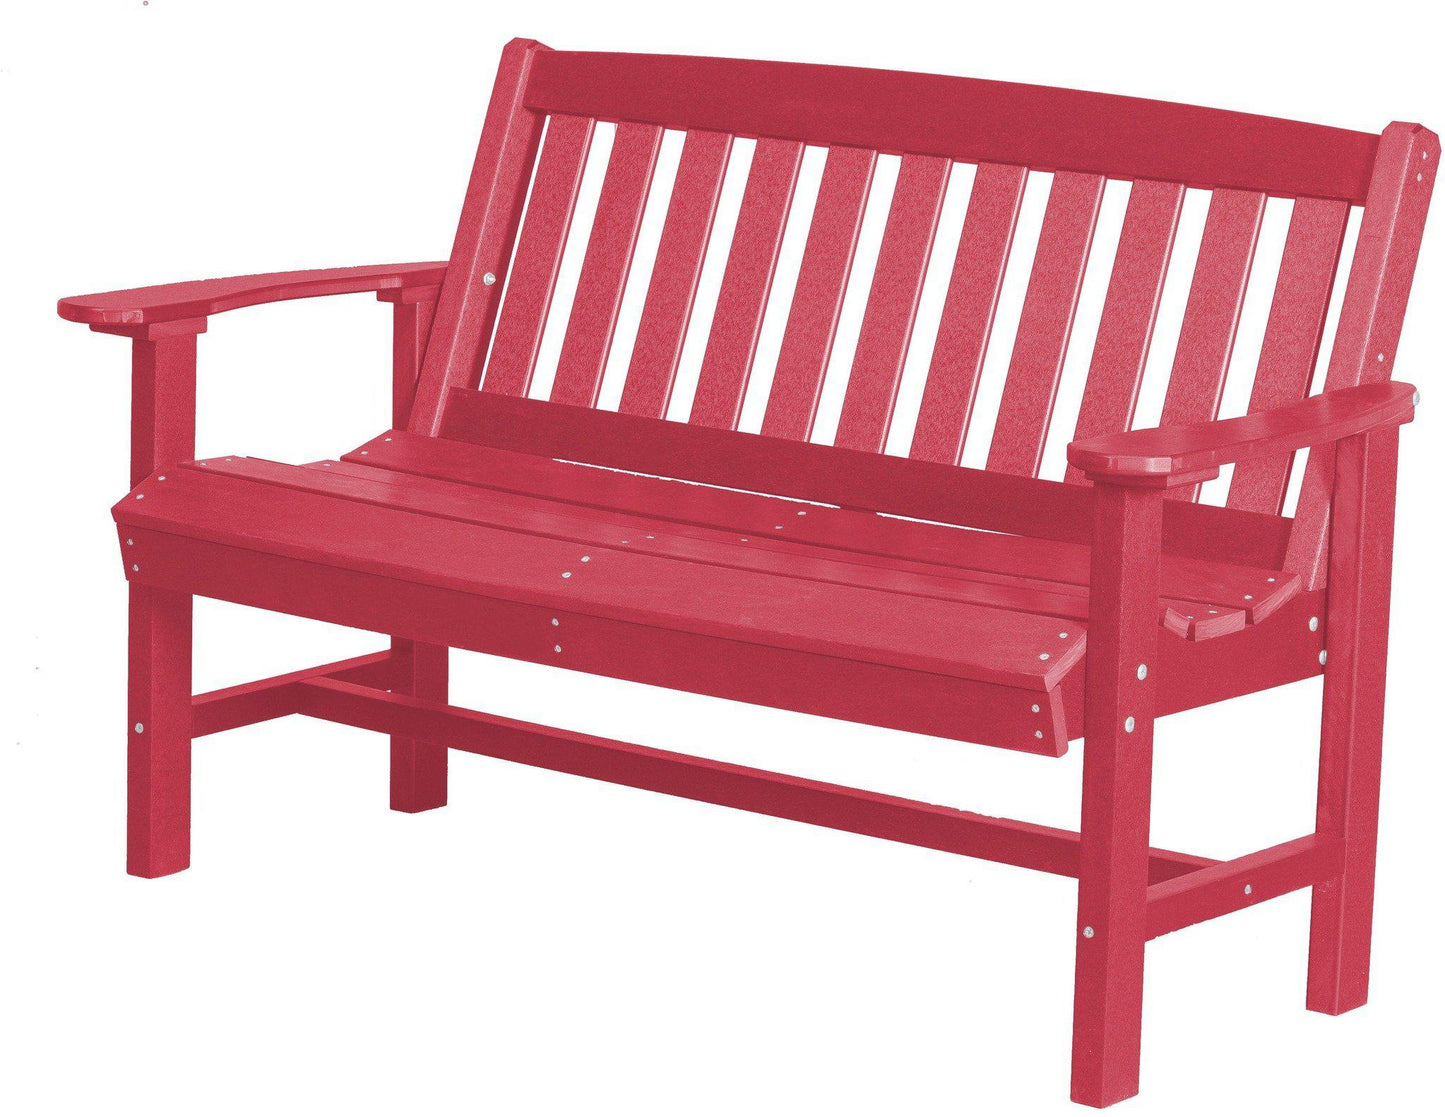 Wildridge Recycled Plastic Outdoor Mission 56” Bench - LEAD TIME TO SHIP 6 WEEKS OR LESS